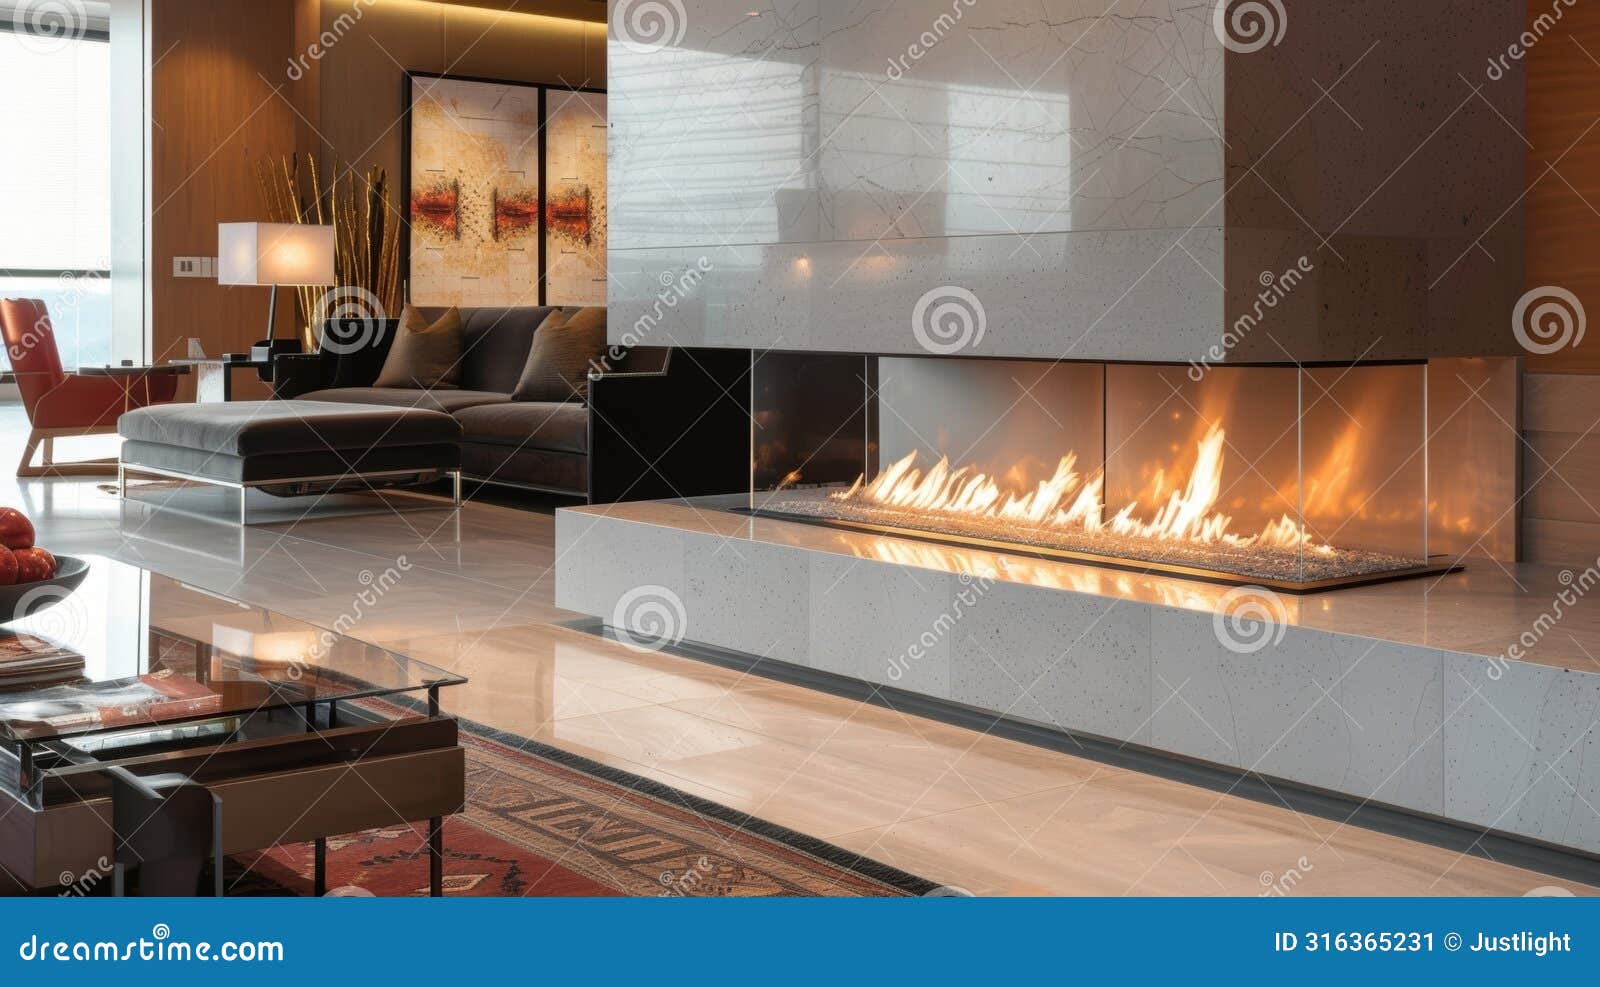 the fireplace with its gl and modern aesthetic serves as a stylish and functional addition to the sleek and